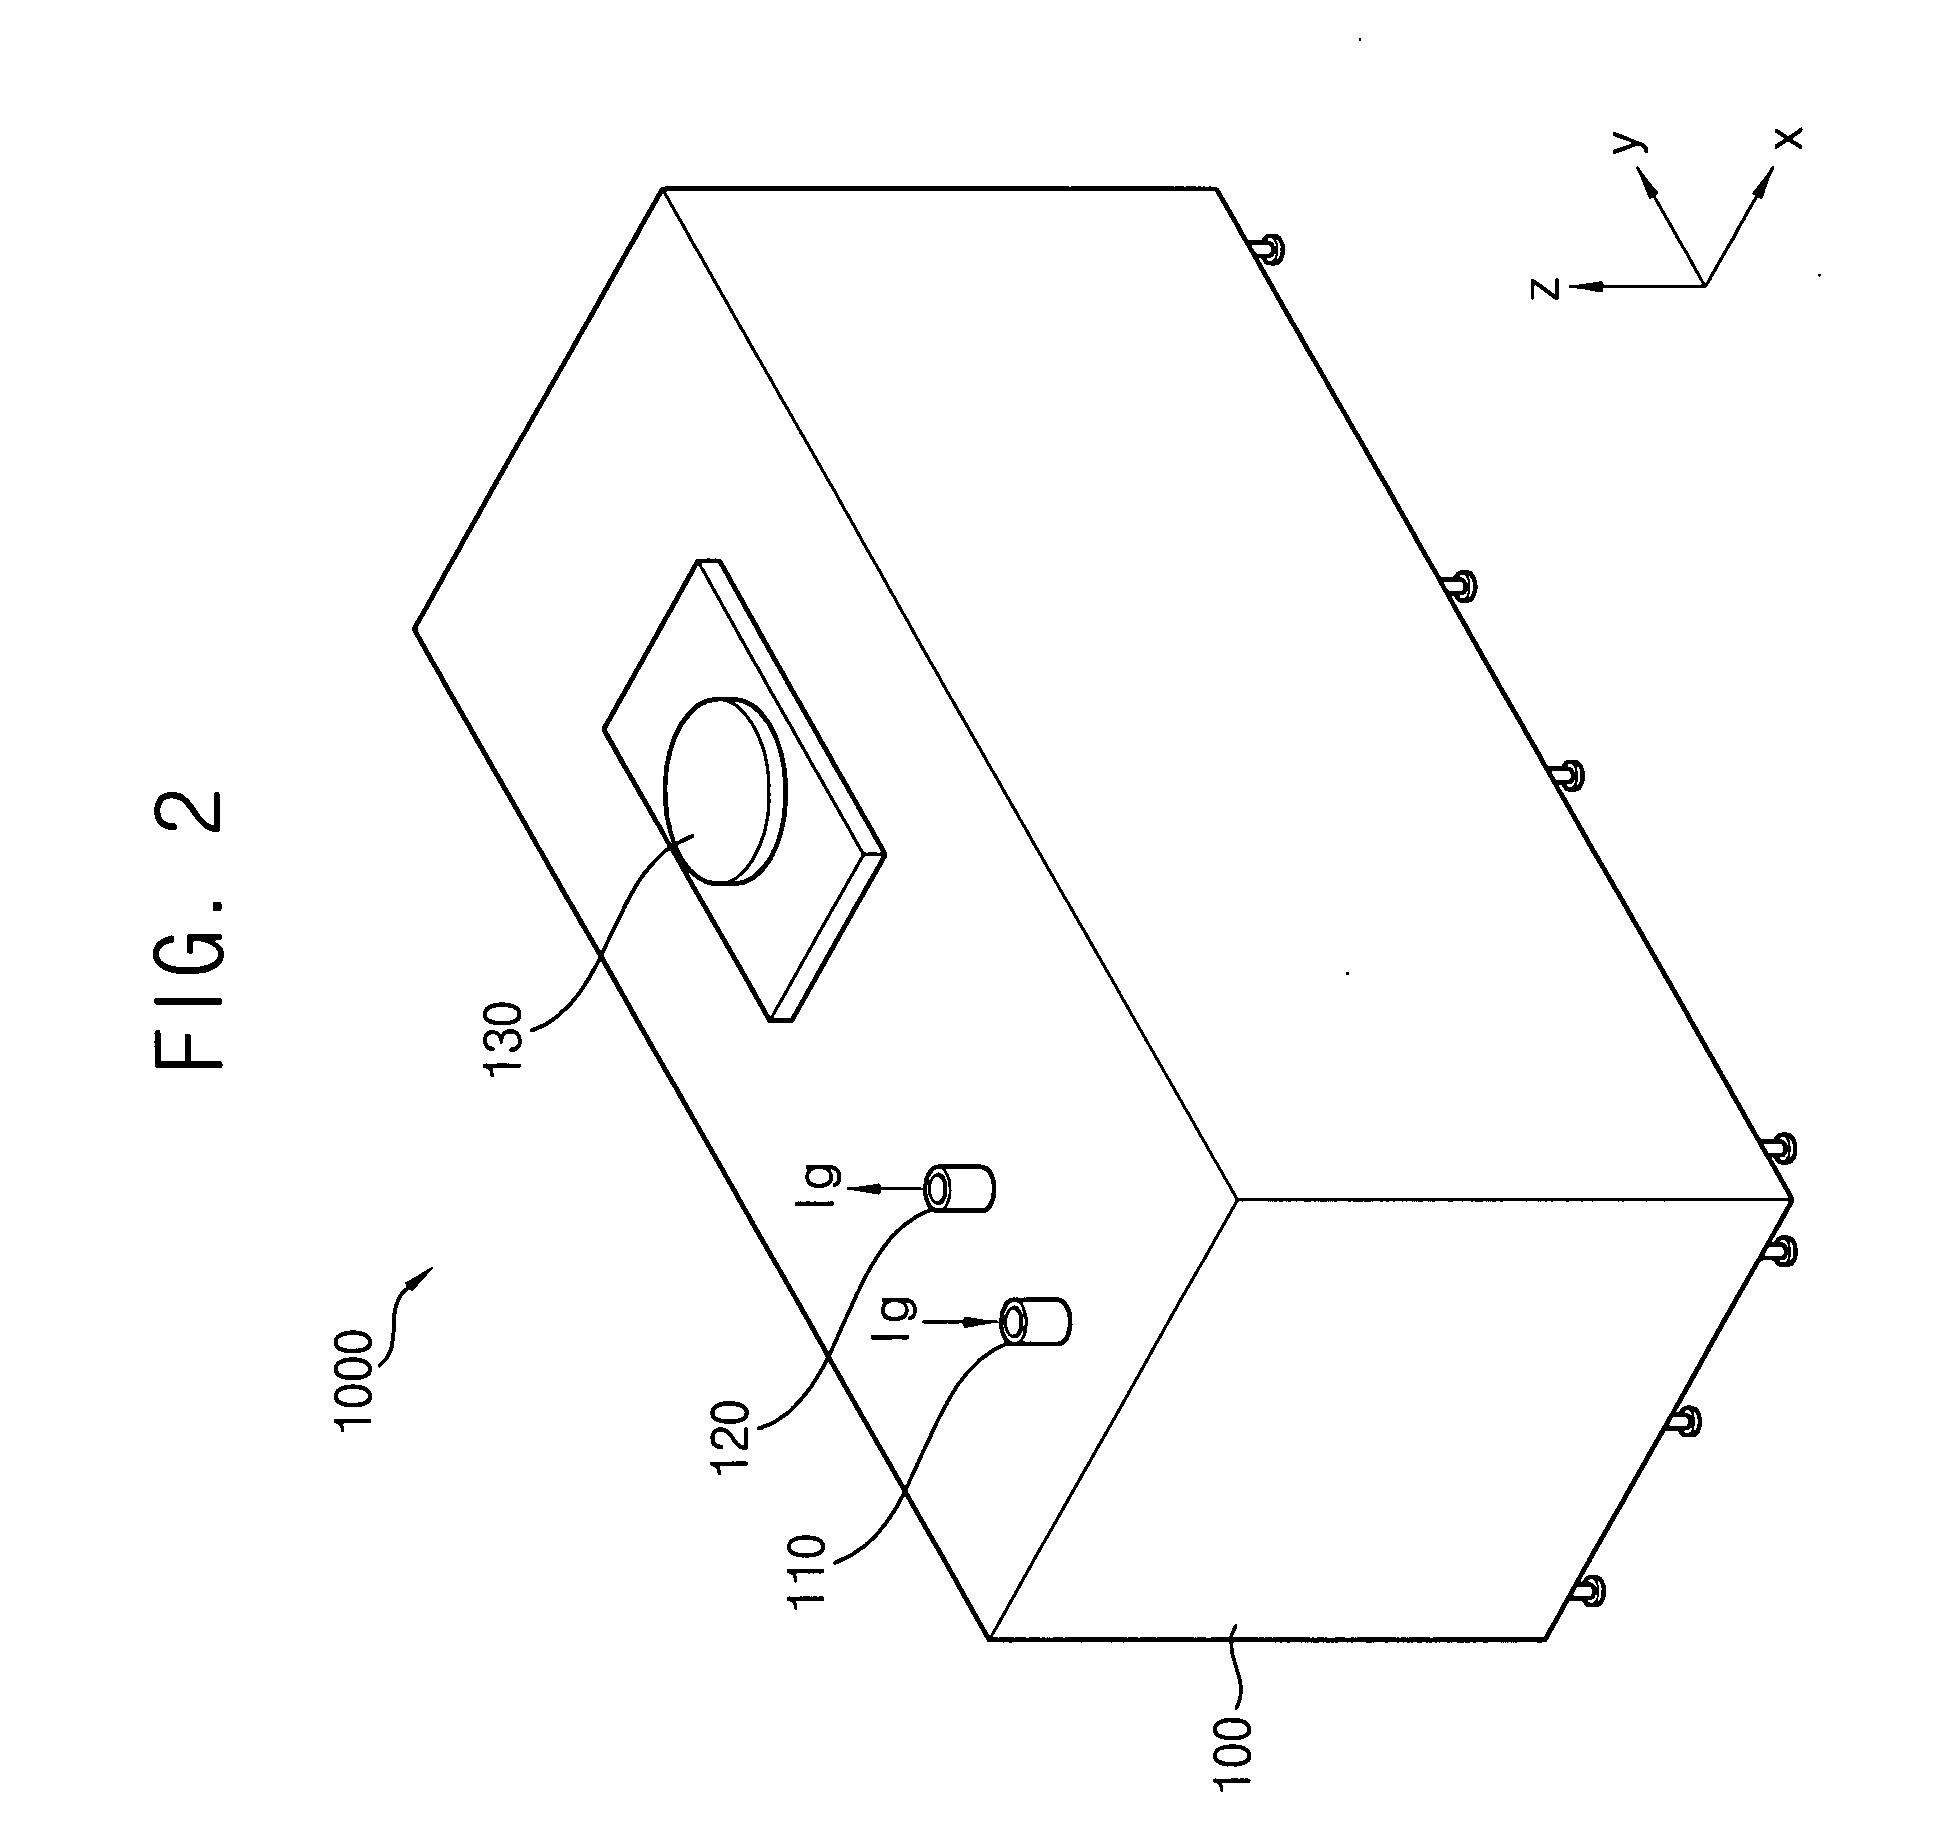 Method of manufacturing a carbon nanotube, and apparatus and system for performing the method